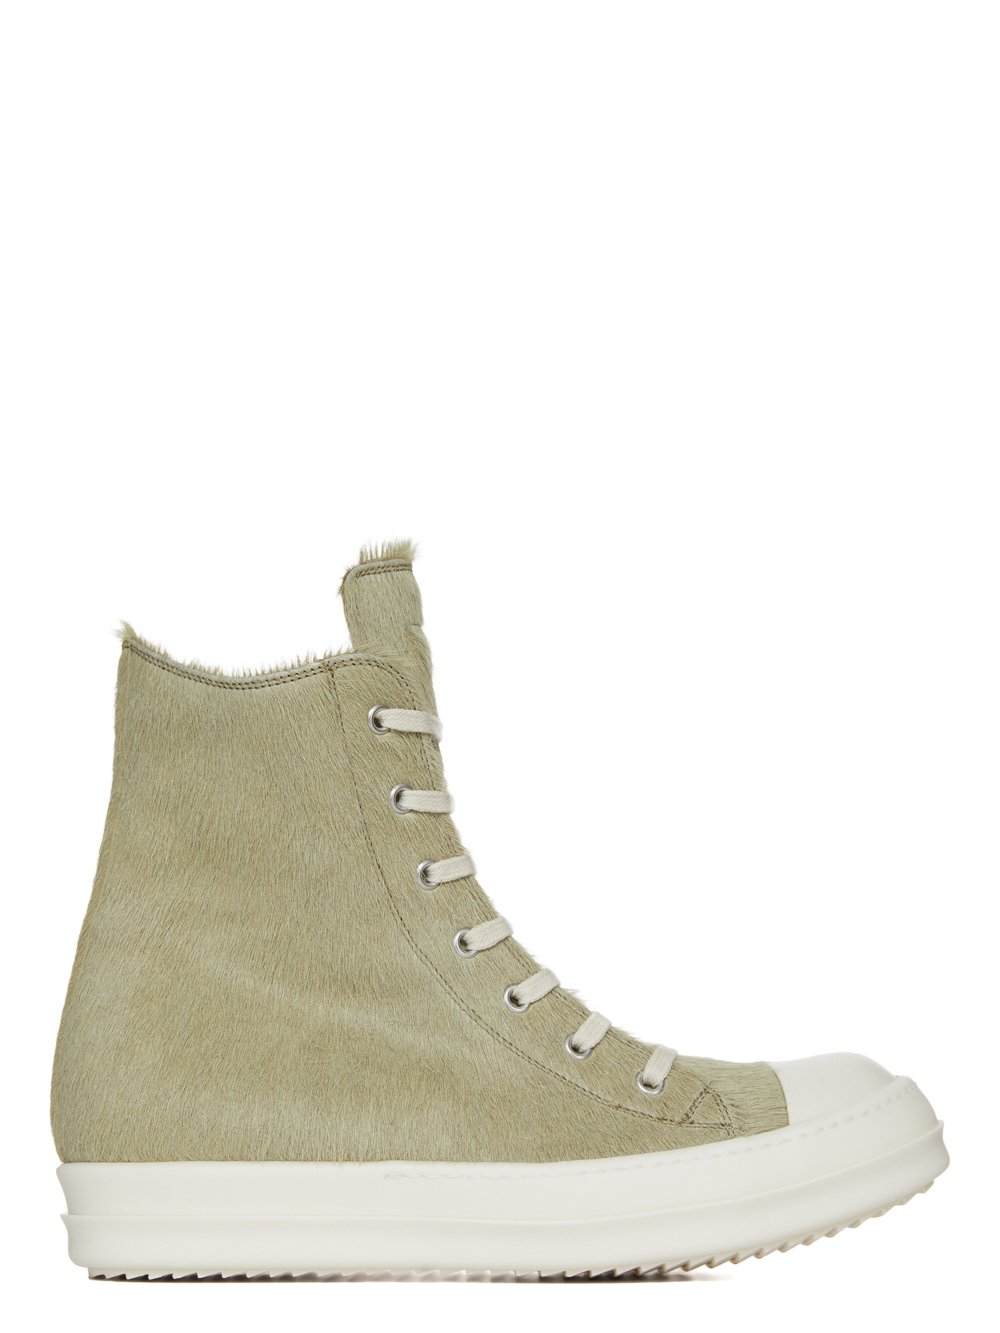 RICK OWENS FW23 LUXOR RUNWAY SNEAKS IN DIRTY ACID UNSHAVED COW LEATHER